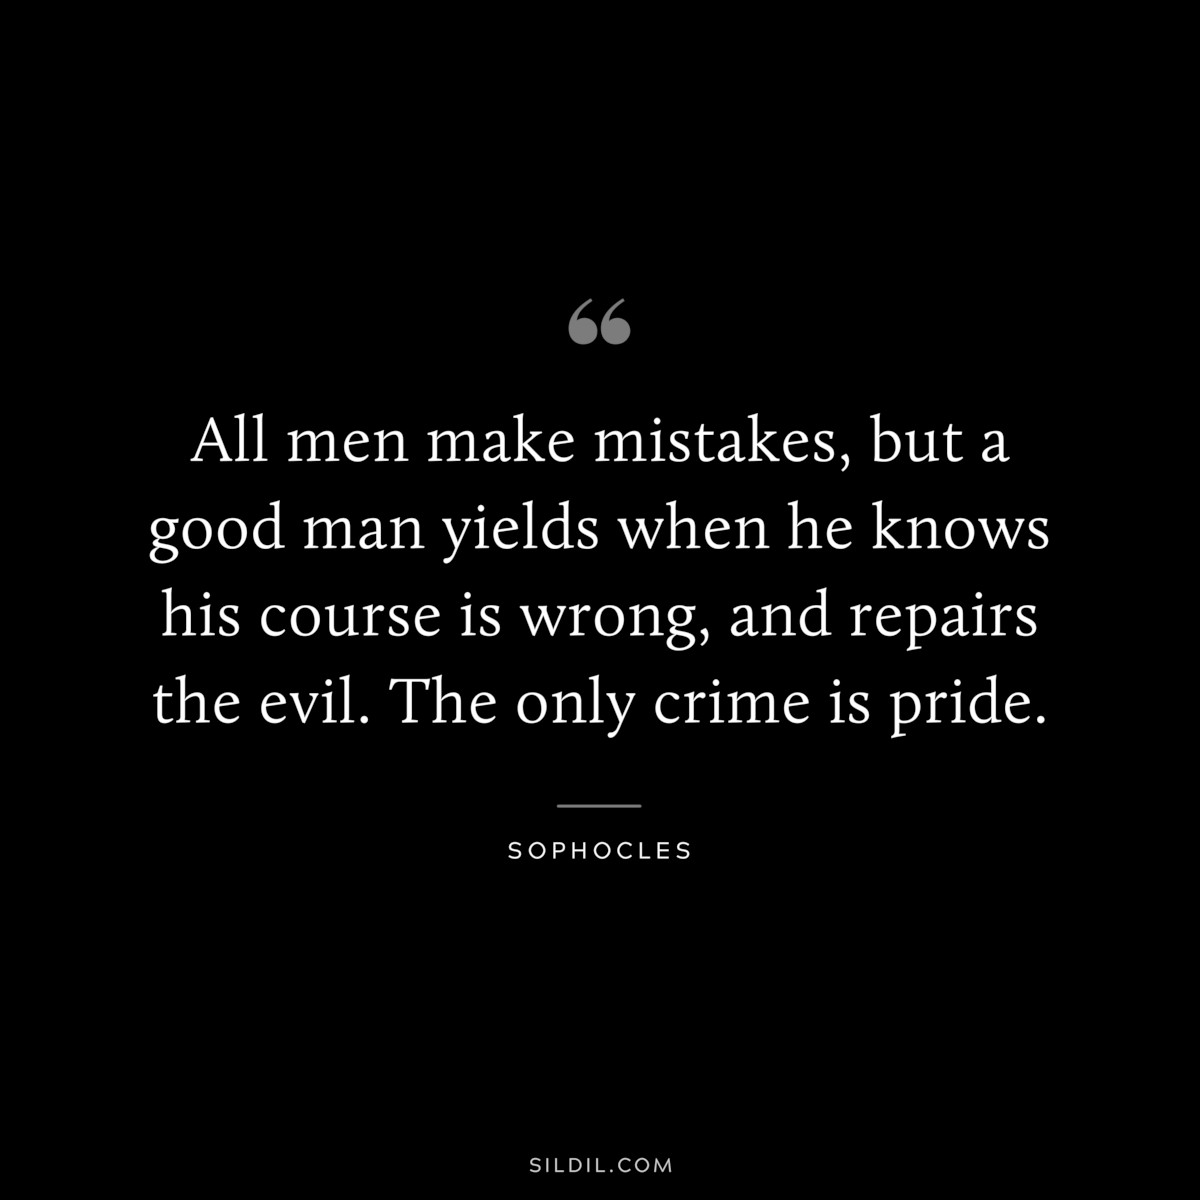 All men make mistakes, but a good man yields when he knows his course is wrong, and repairs the evil. The only crime is pride. ― Sophocles